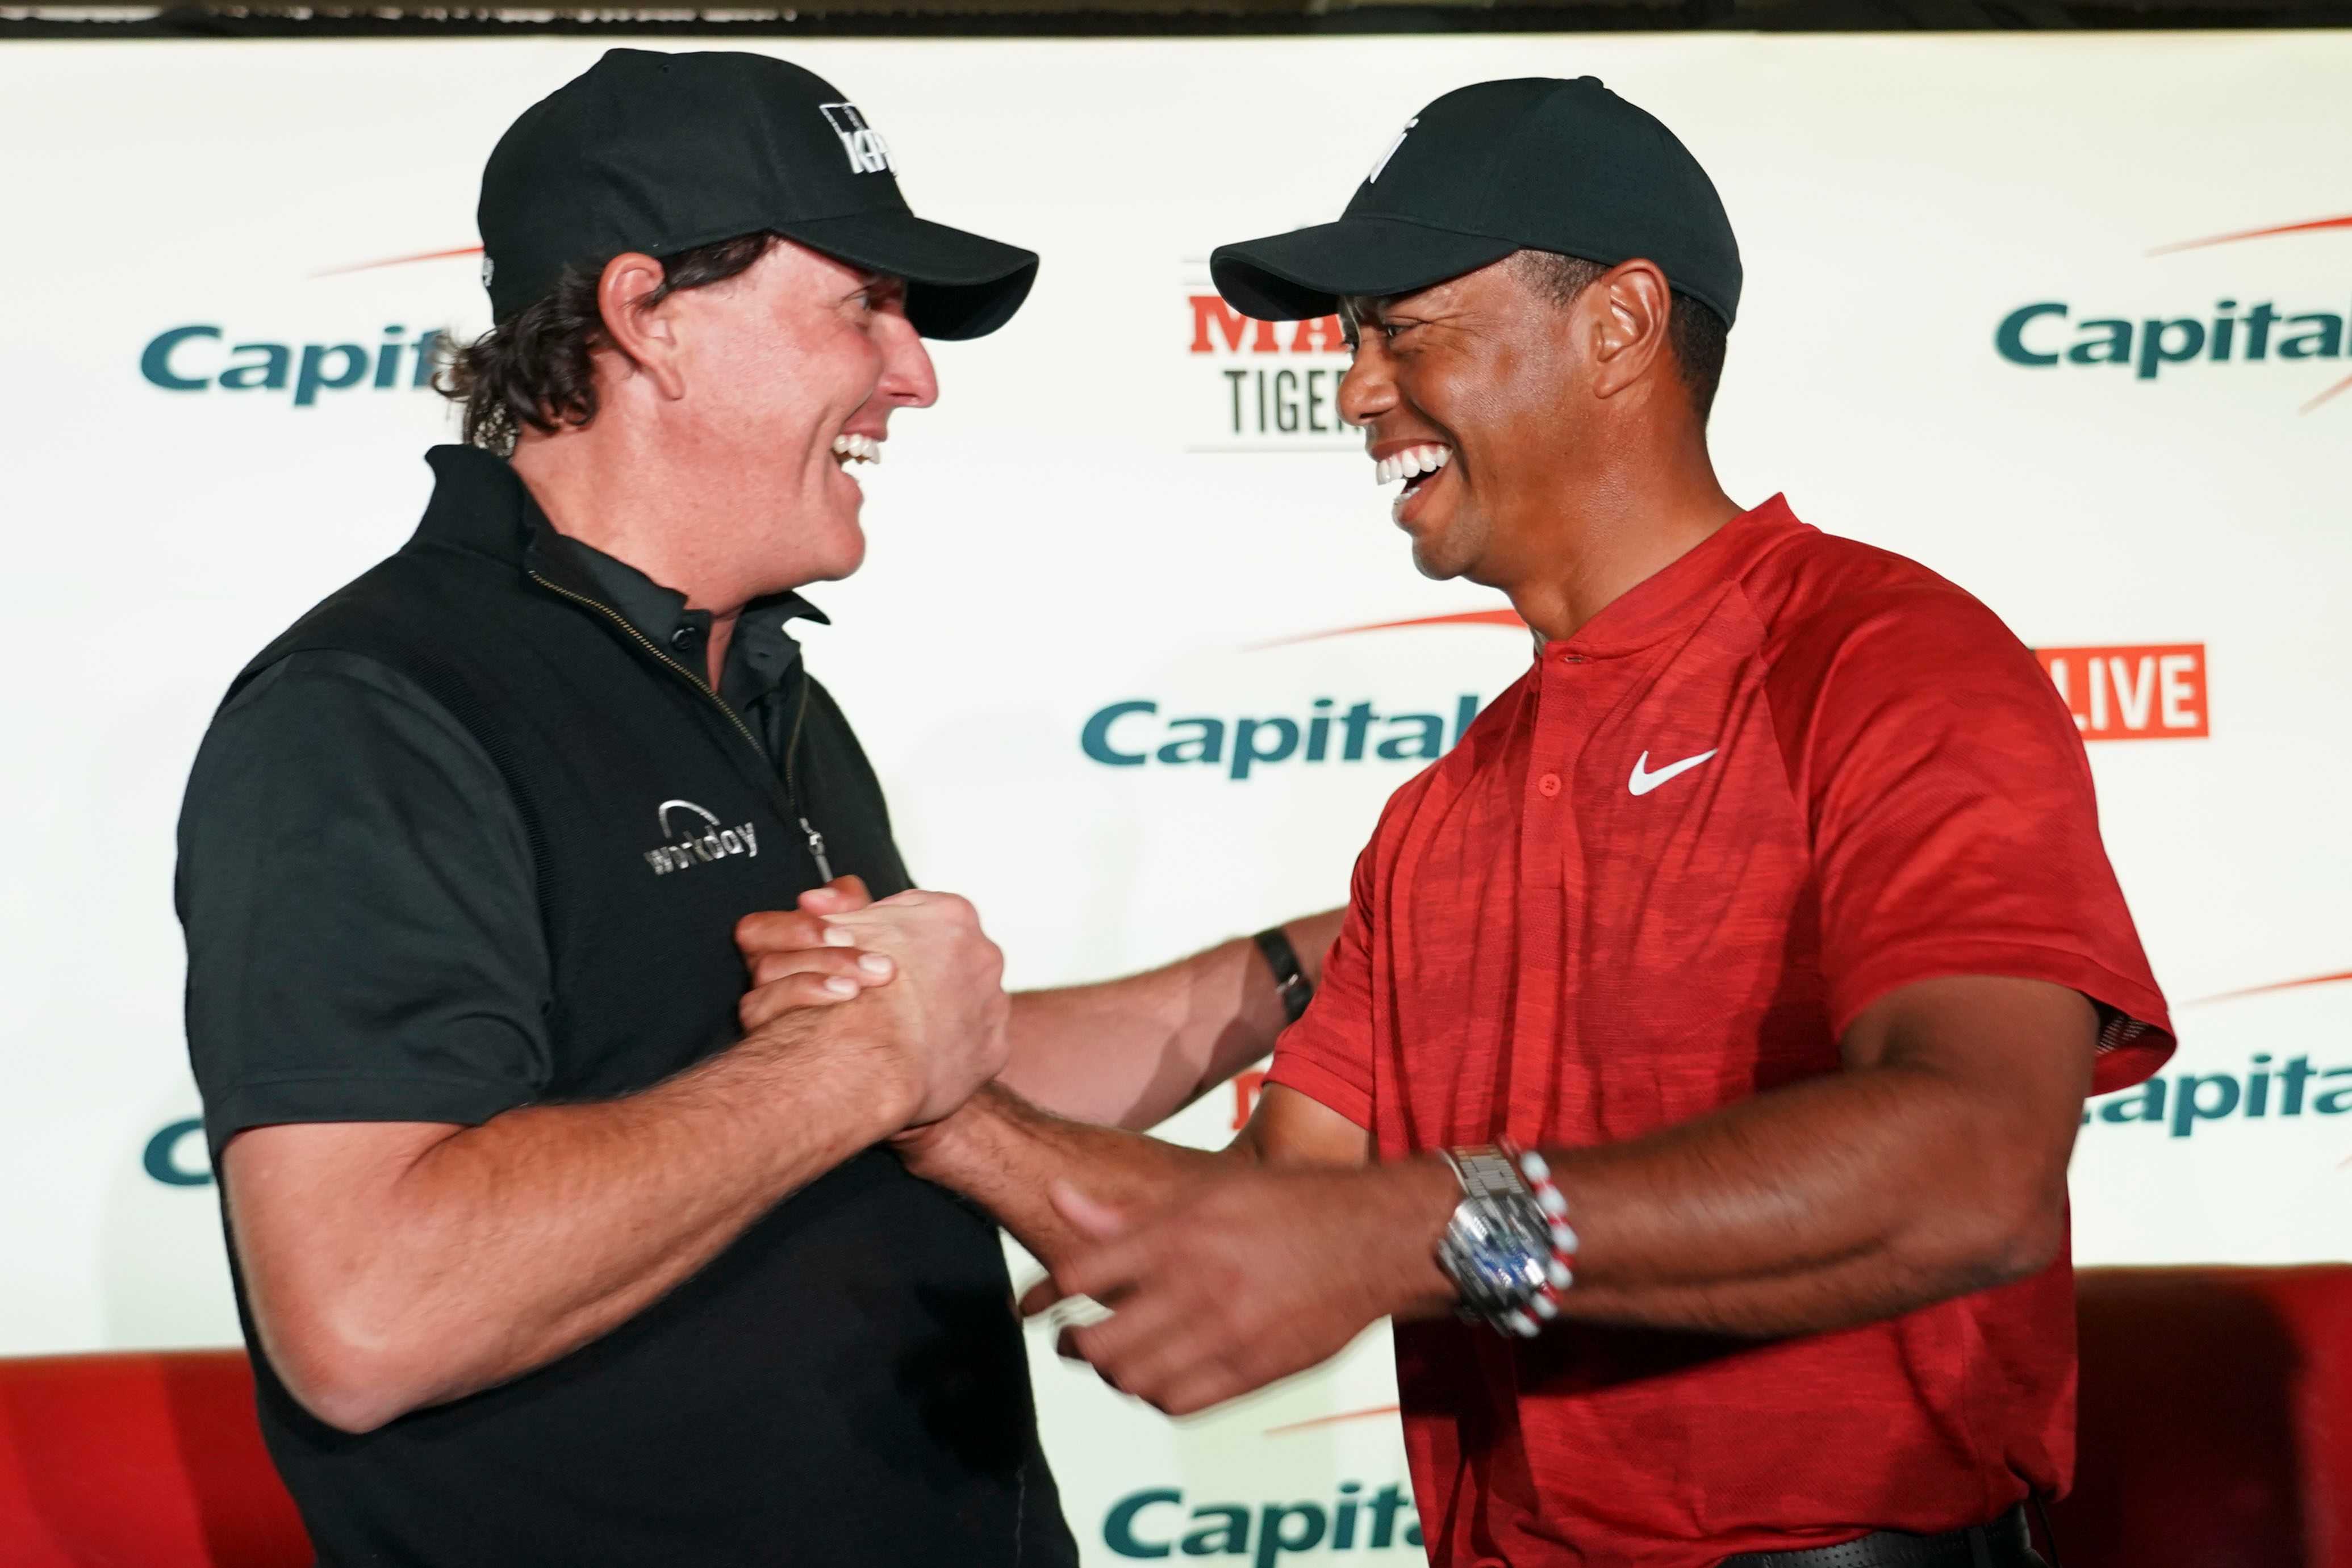 Tiger Woods and GolfTV to launch head-to-head series like 'The Match'